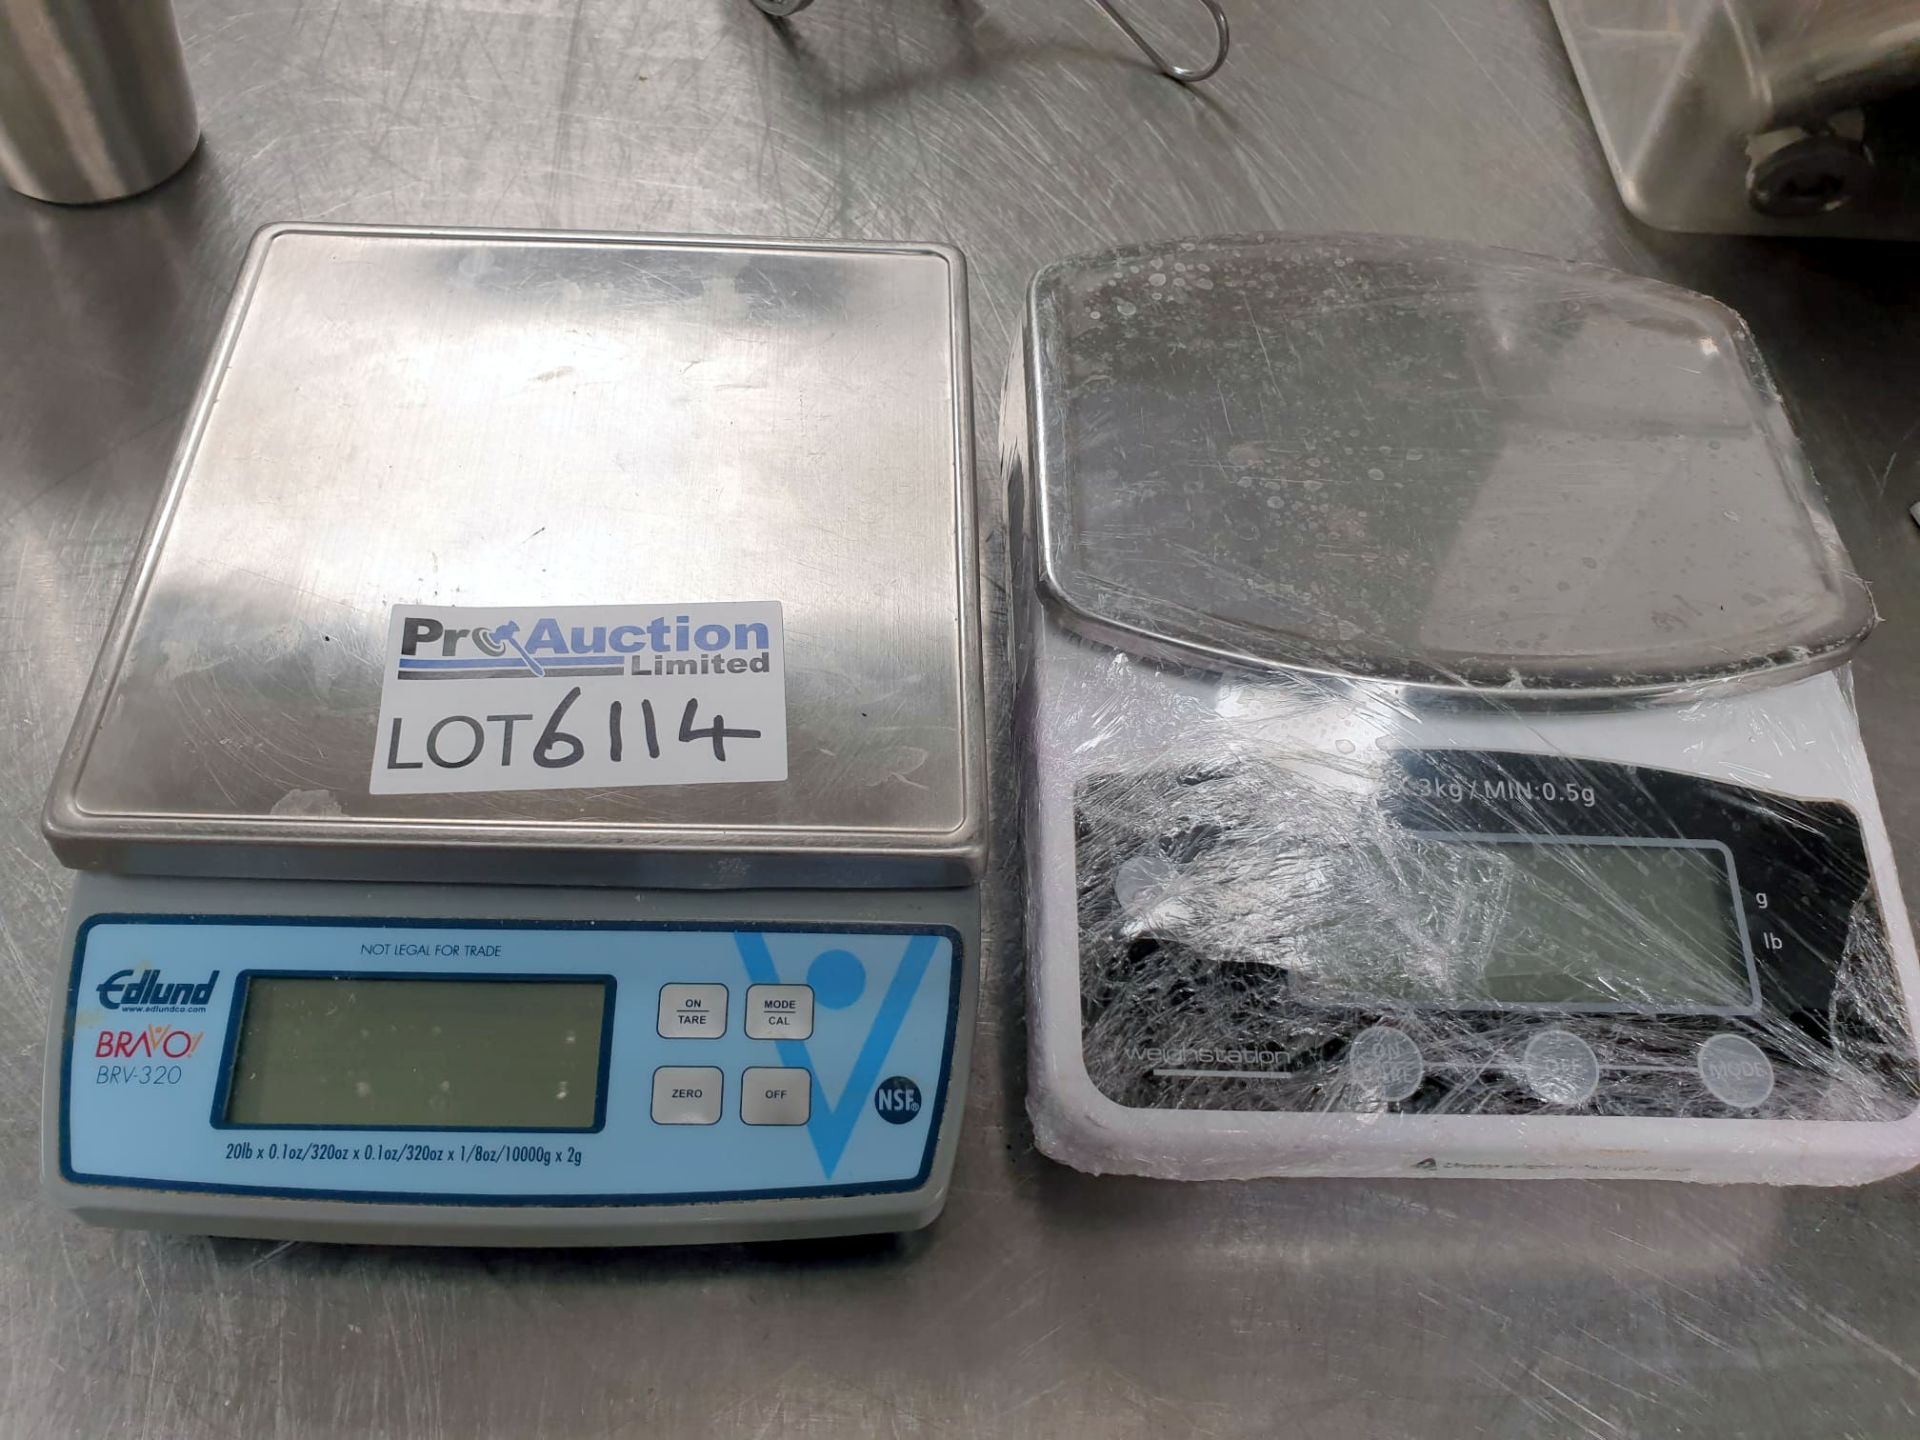 2 x countertop electronic scales